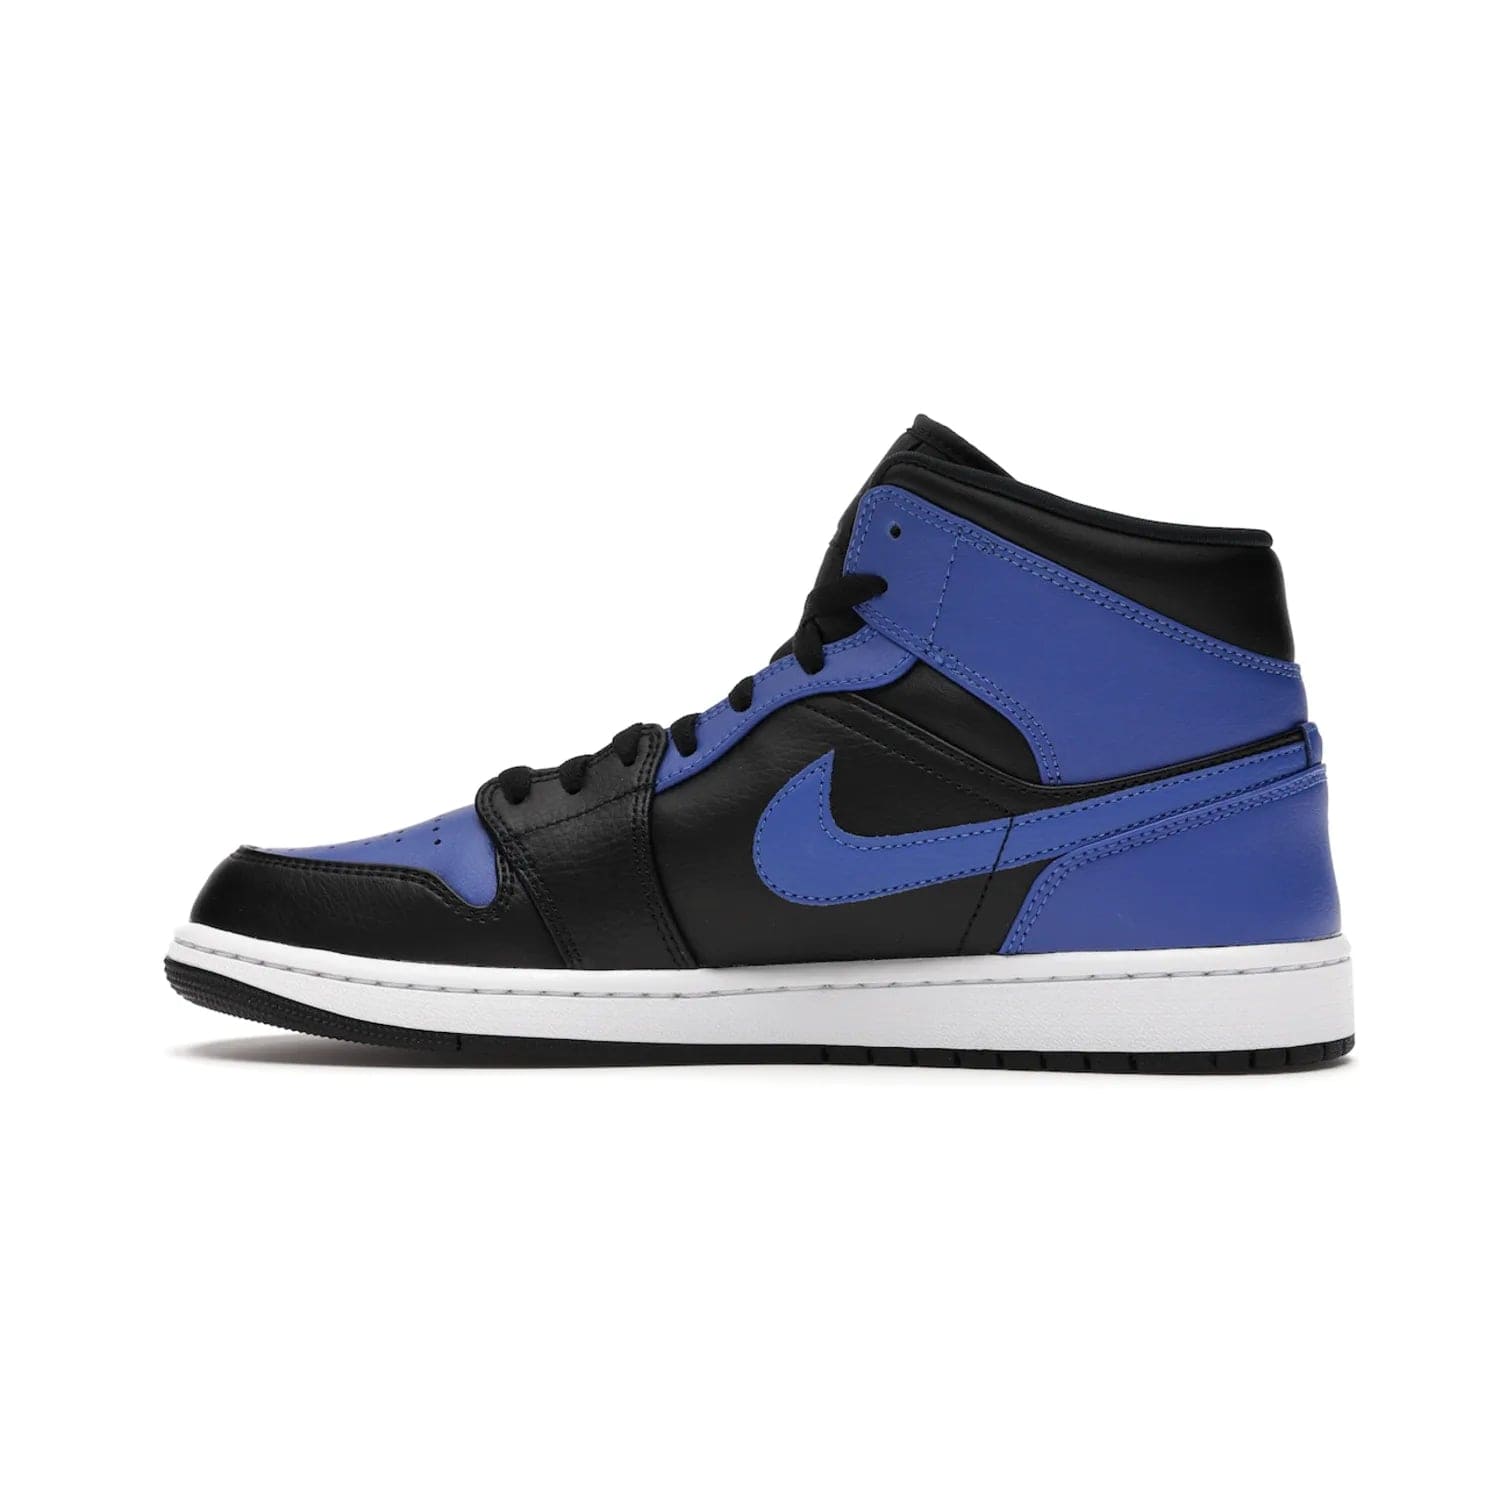 Jordan 1 Mid Hyper Royal Tumbled Leather - Image 20 - Only at www.BallersClubKickz.com - Iconic colorway of the Air Jordan 1 Mid Black Royal Tumbled Leather. Features a black tumbled leather upper, royal blue leather overlays, white midsole & black rubber outsole. Released December 2020. Adds premium style to any collection.